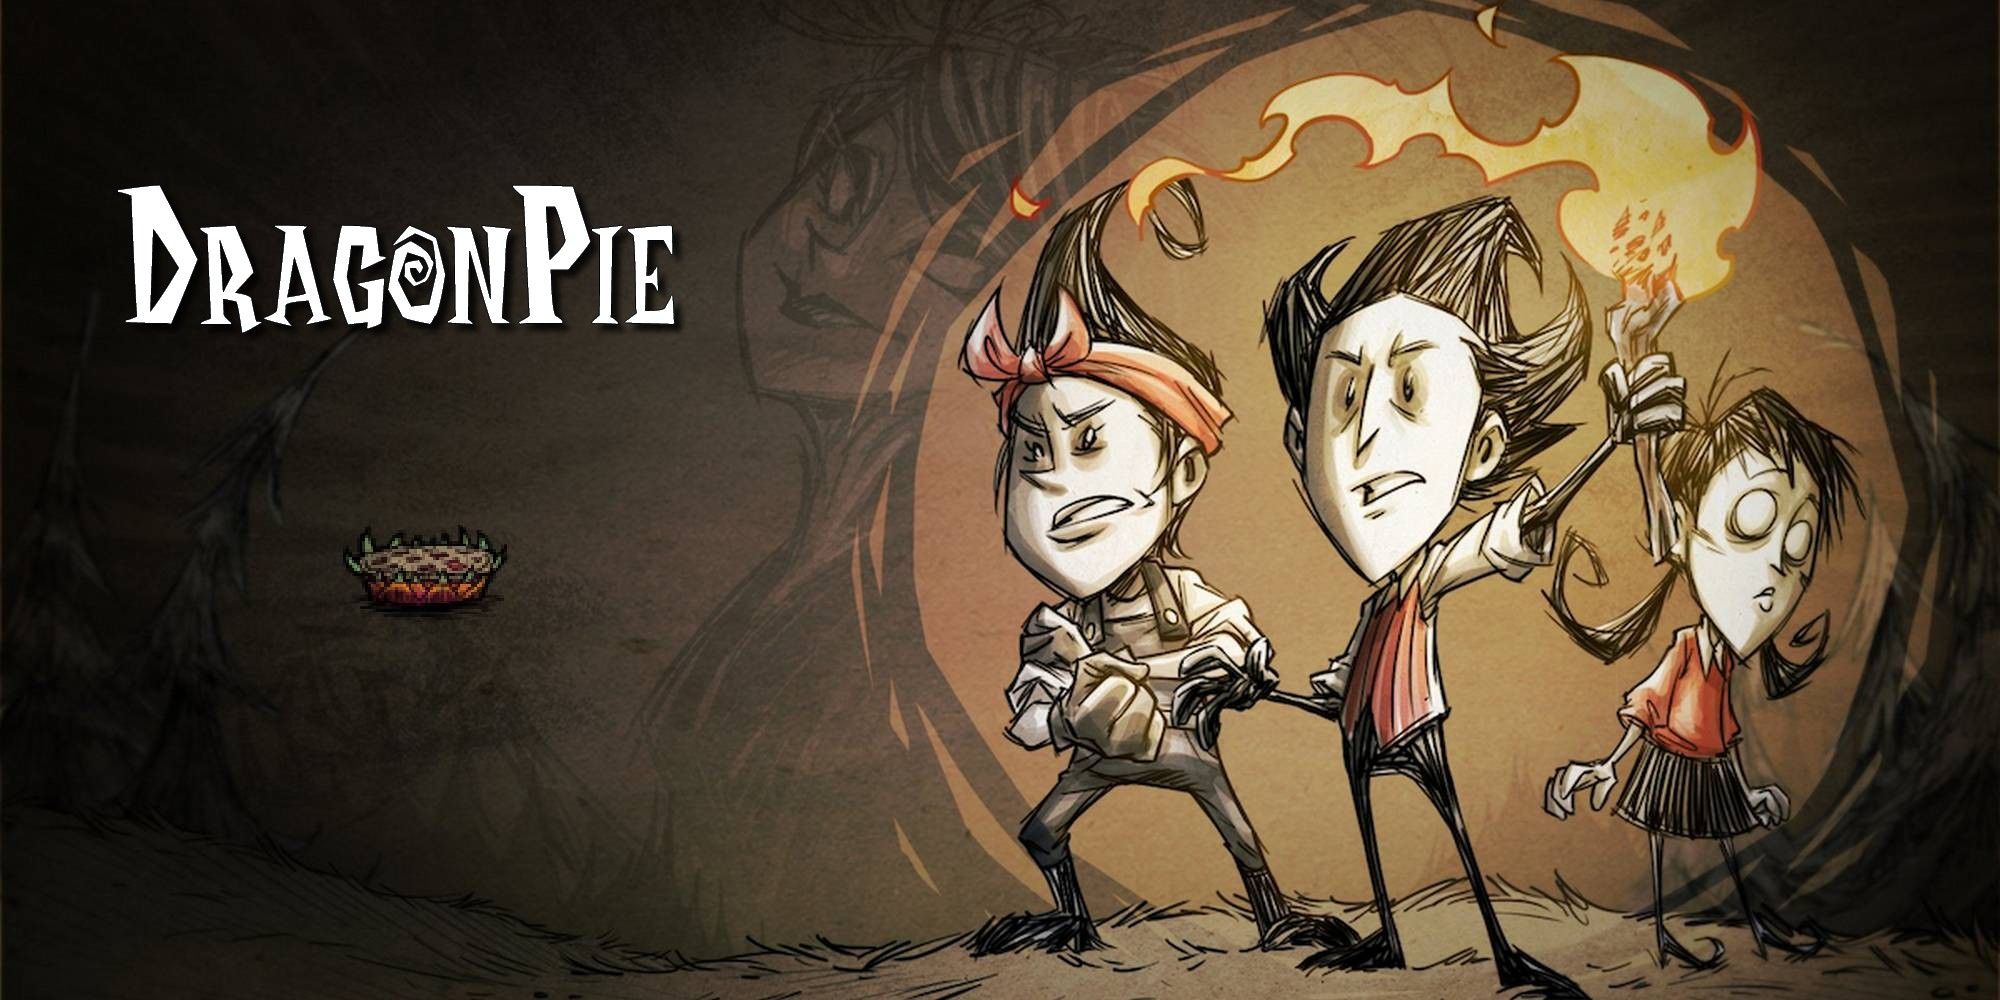 wilson willow don't starve together best recipes dst dragonpie